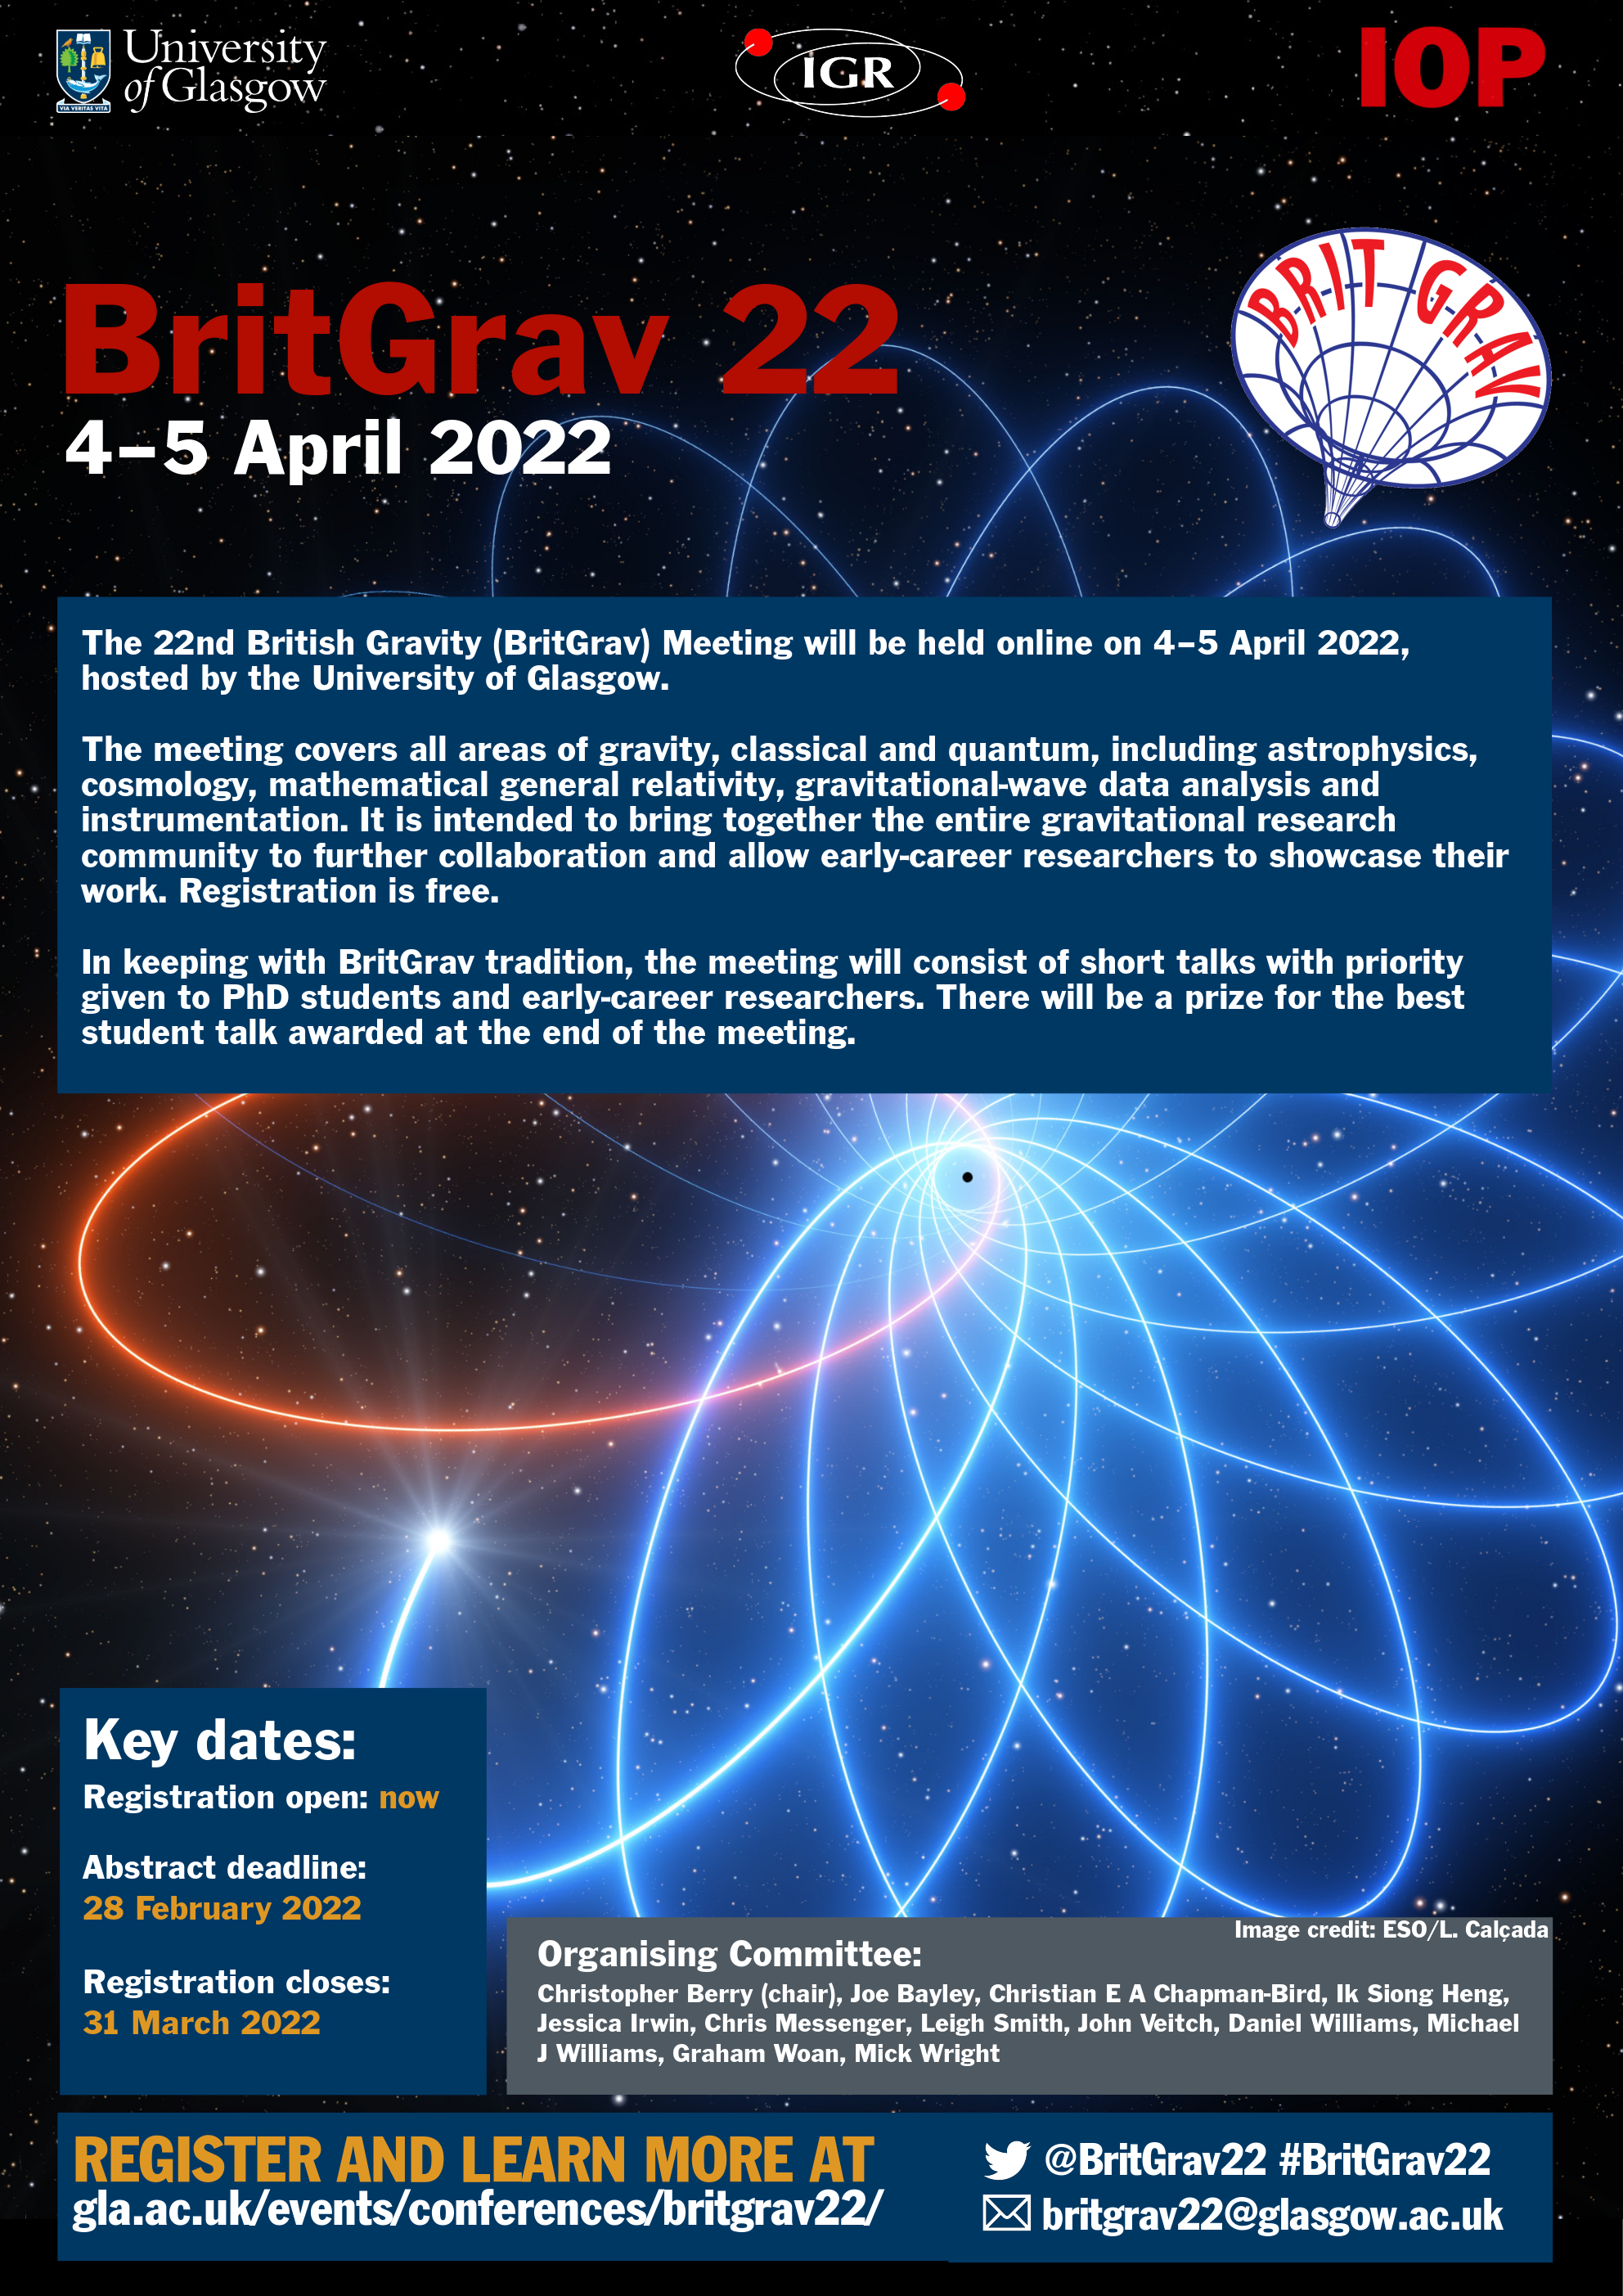 BritGrav22 poster containing a summary of the event, key dates, organising committee, website URL (https://www.gla.ac.uk/events/conferences/britgrav22/), email (britgrav22@glasgow.ac.uk) and Twitter handle (@BritGrav22). All of the information in the poster can be found on the website.